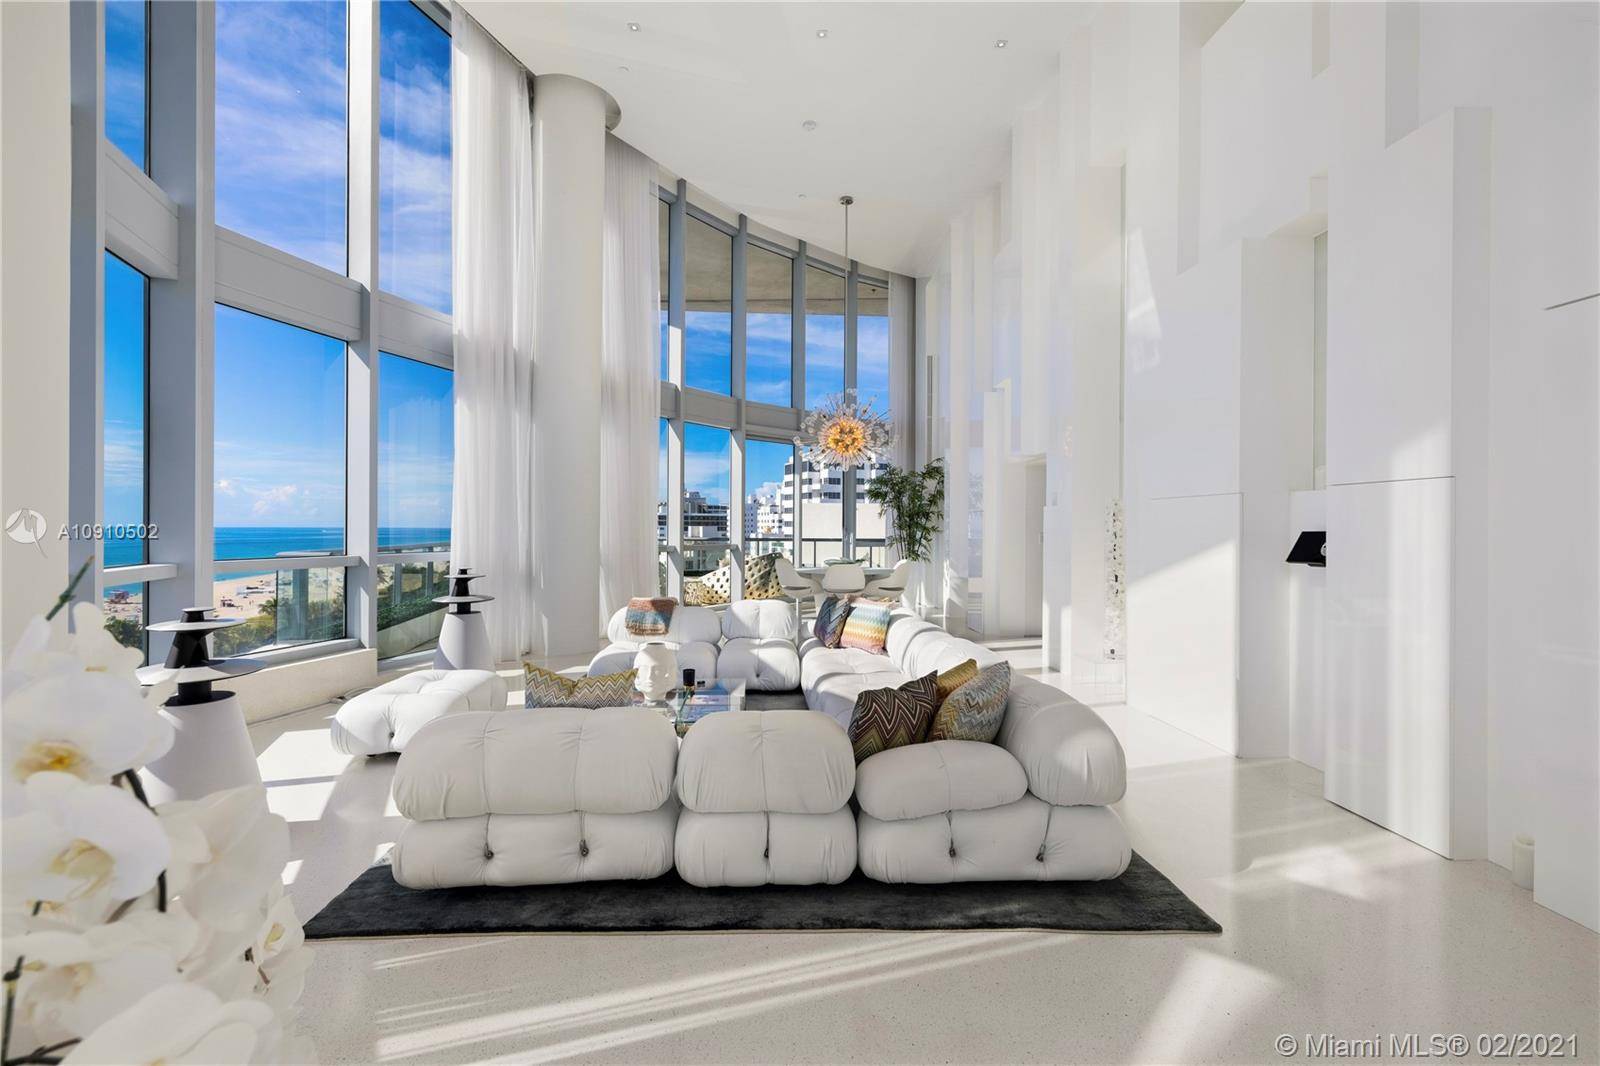 Take in the sweeping panorama of South Beach from this one of a kind extravagantly minimalist townhouse located in the 5 Star Setai with 4 beds and 4 baths in ...